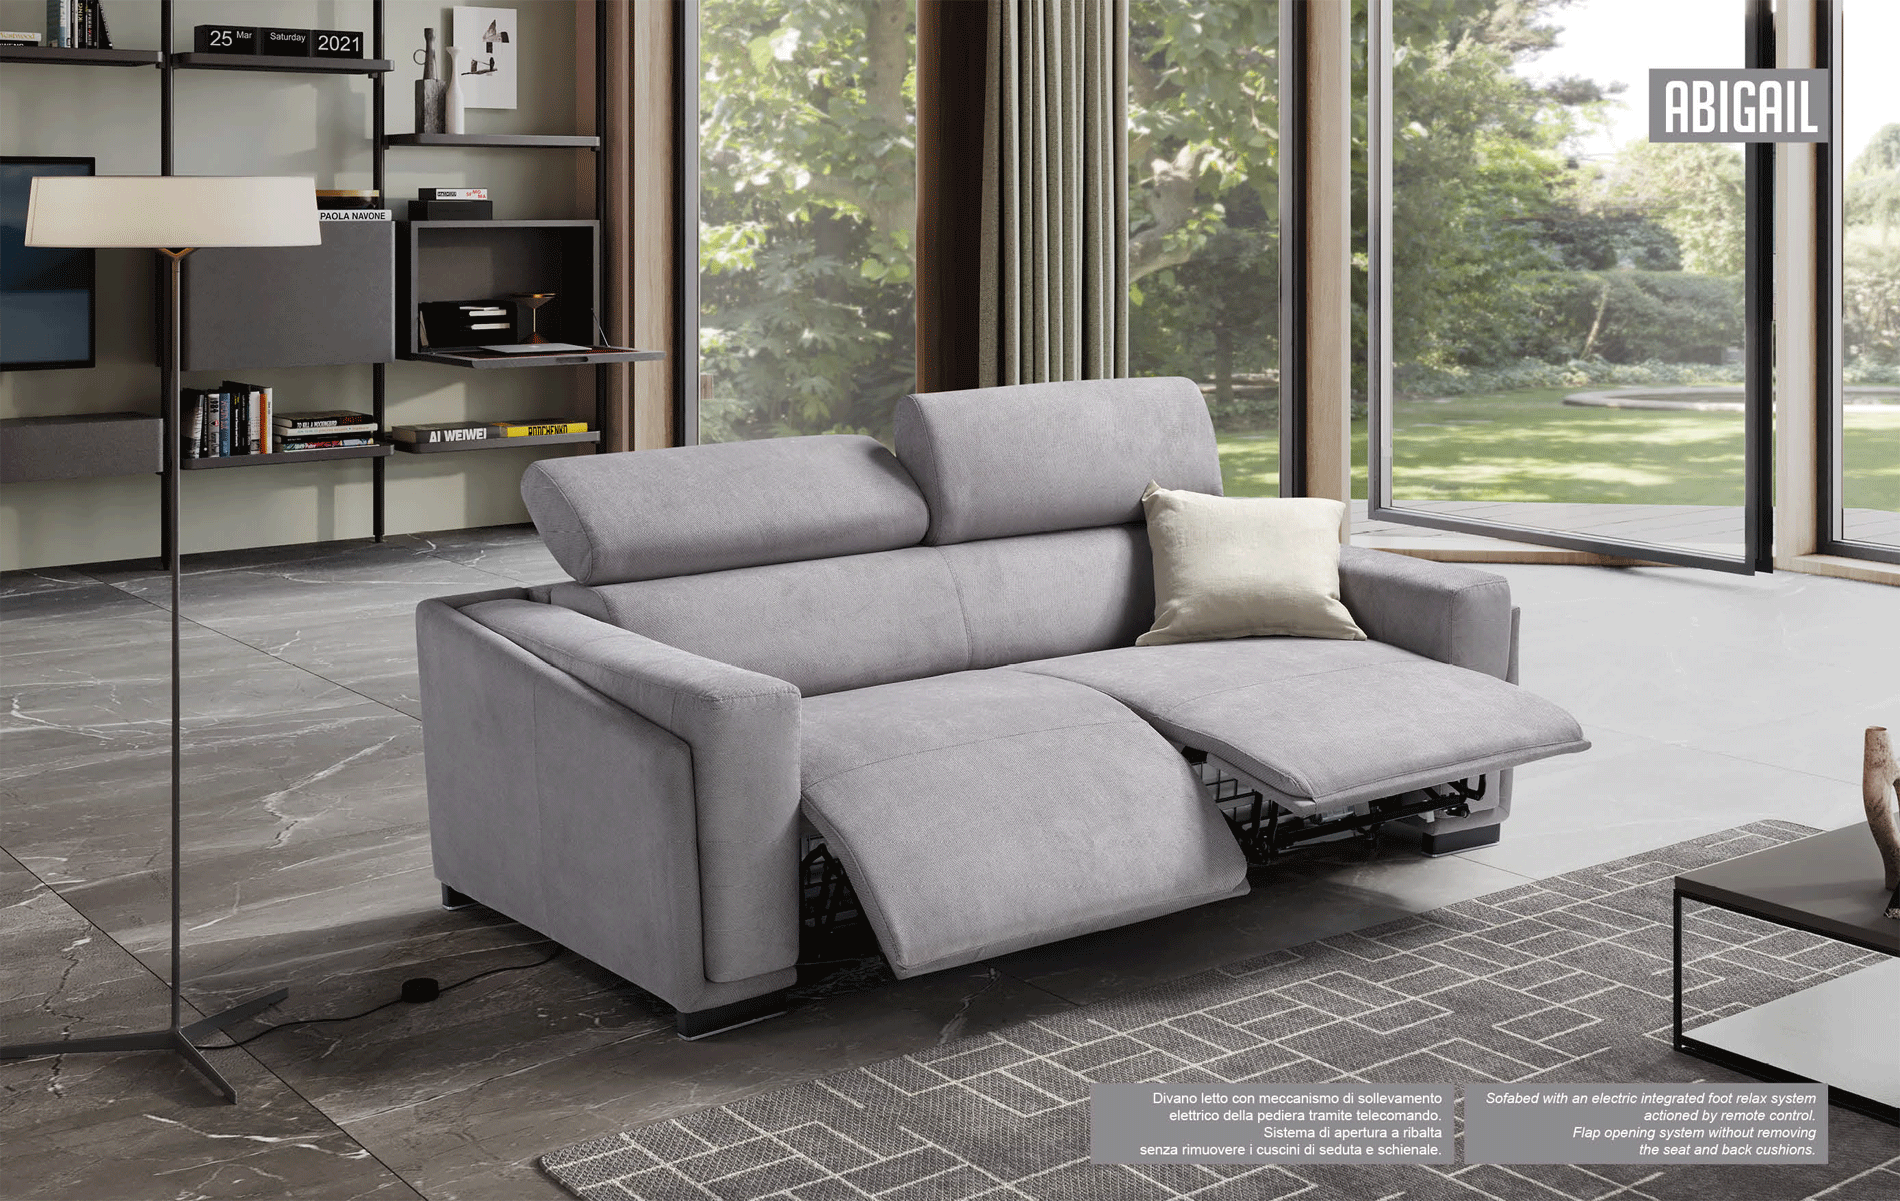 Brands Camel Classic Living Rooms, Italy Abigail